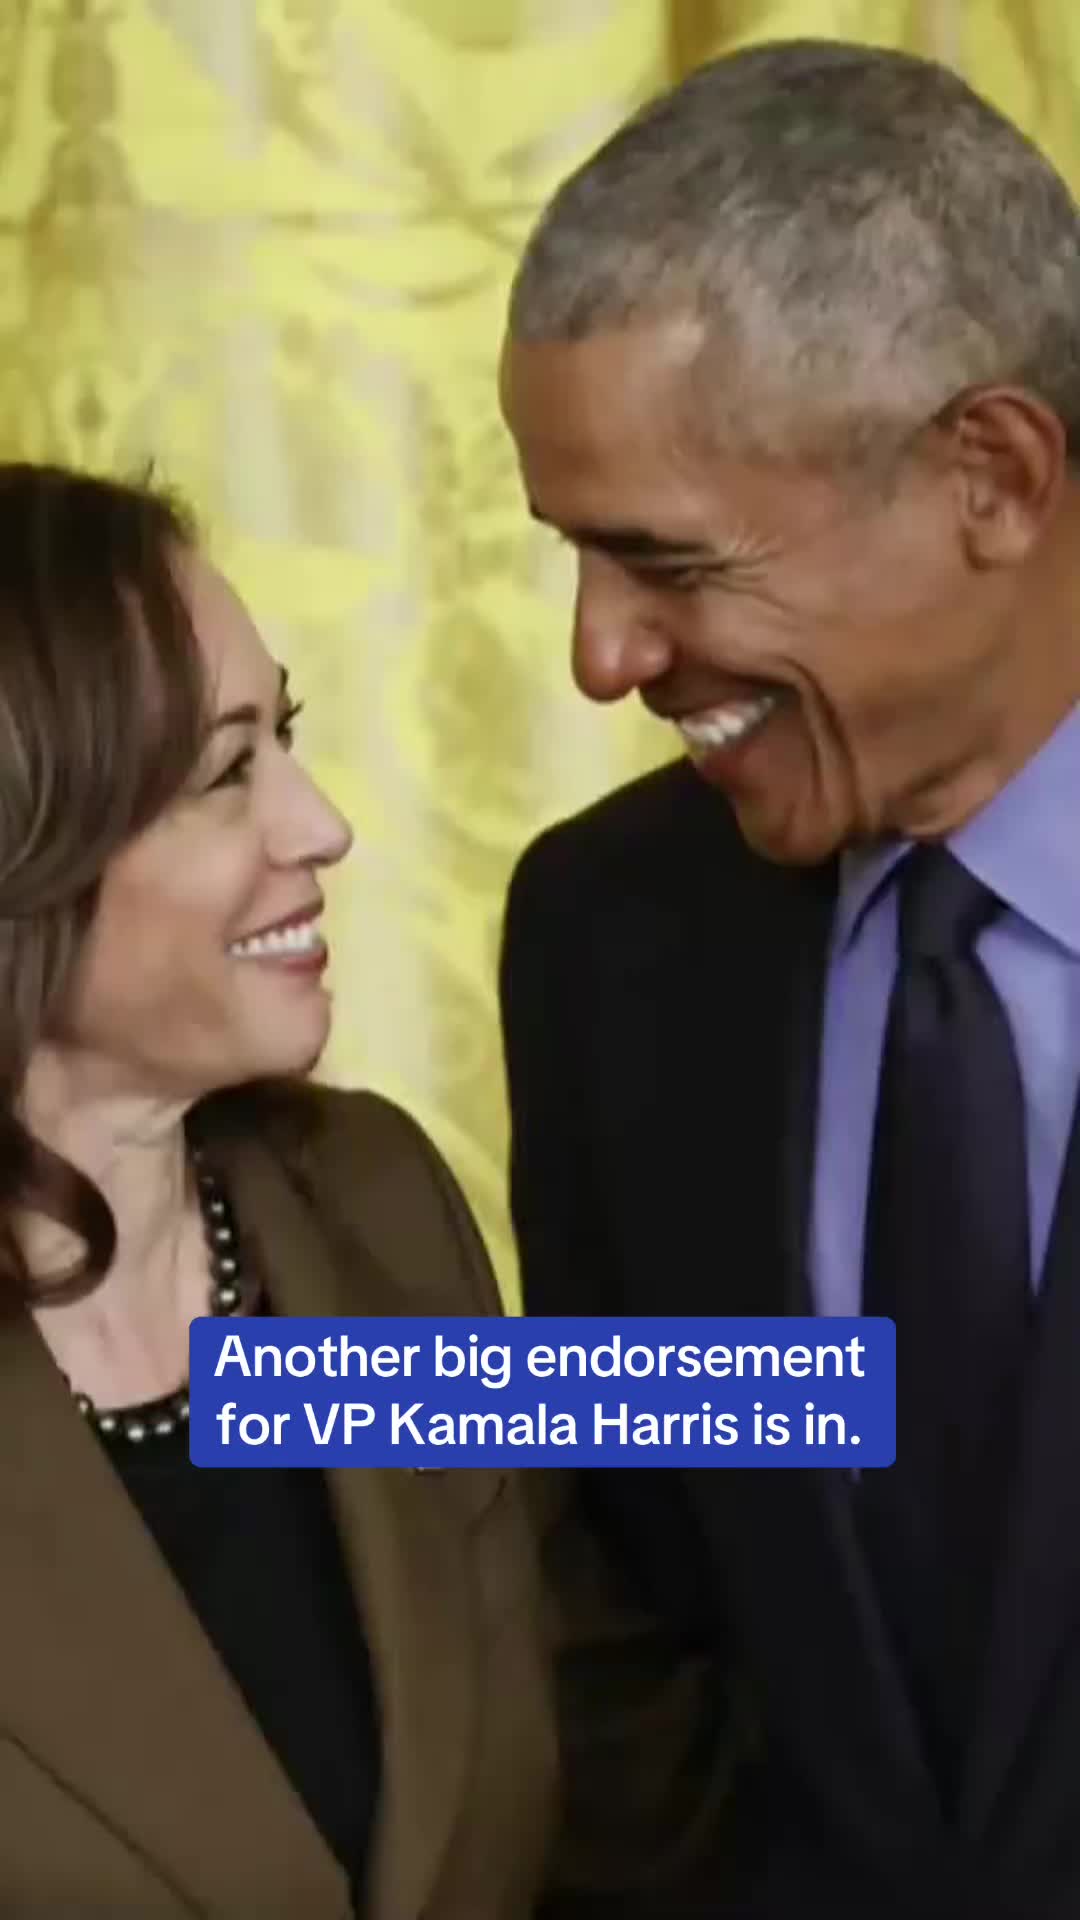 Barack and Michelle Obama have endorsed Kamala Harris, just days after Pres. Biden announced he would not seek reelection. The former president and first lady told the VP in a call that they will “do everything we can to get you through this election and into the Oval Office.” #news #kamalaharris #obama #election2024